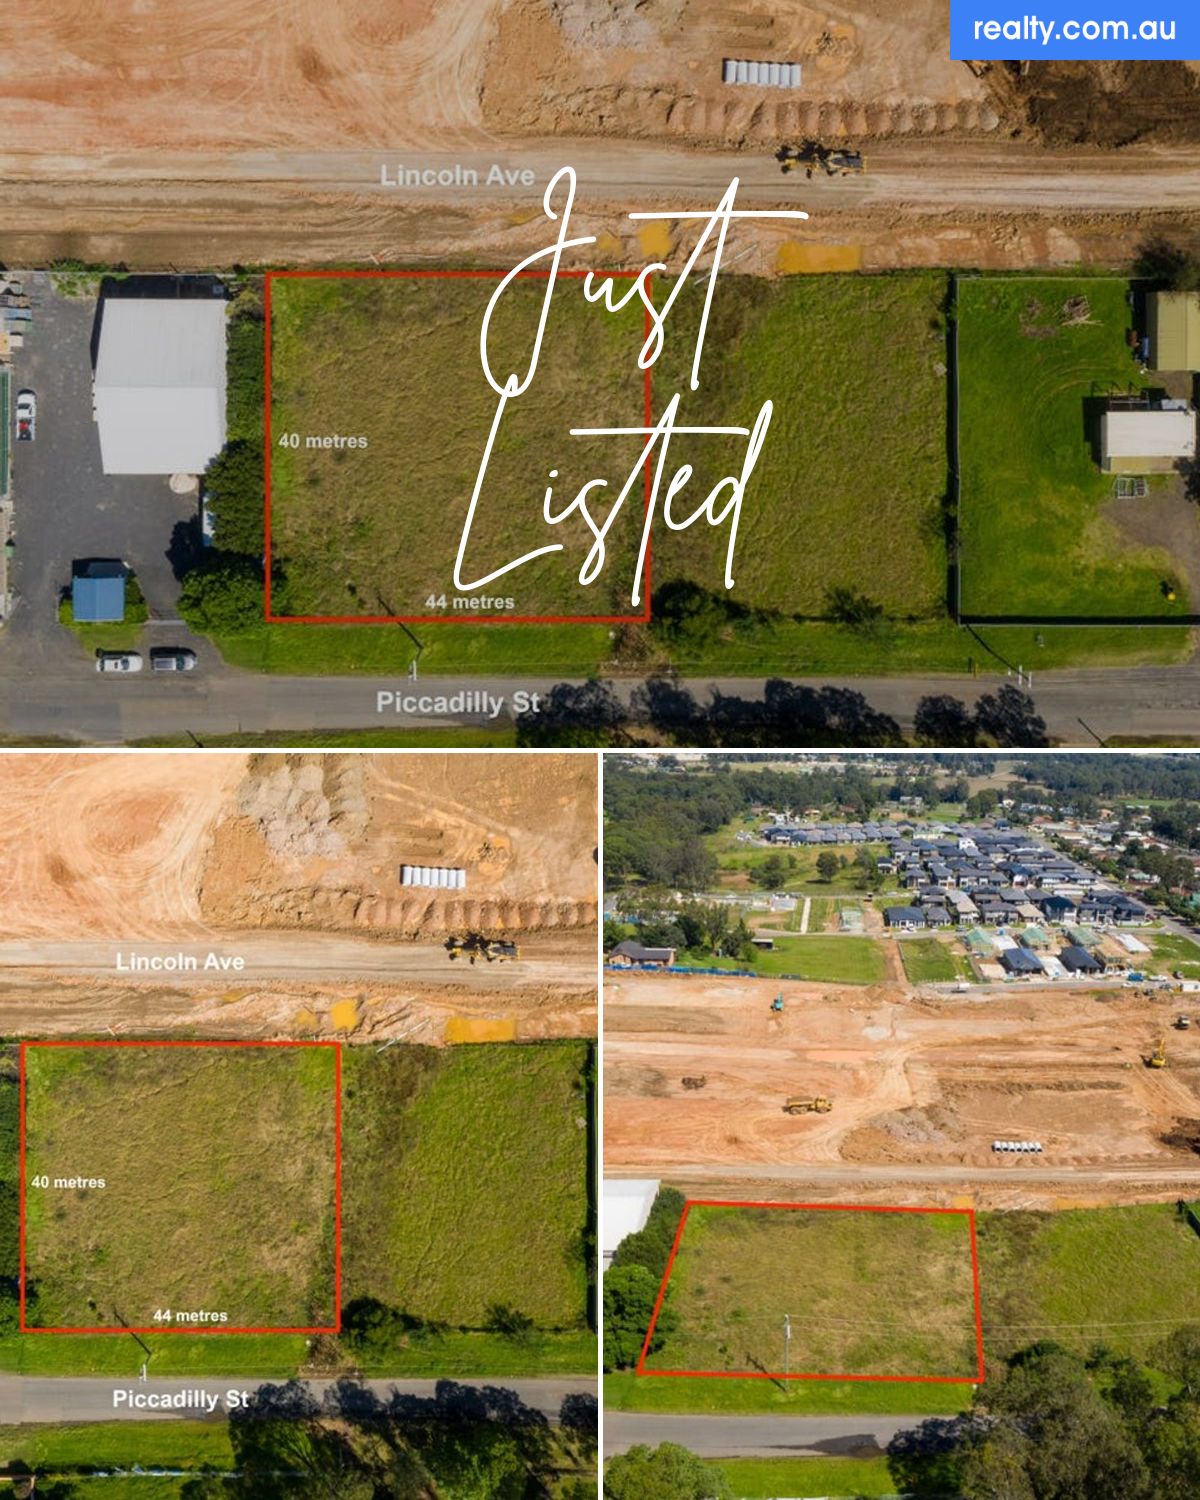 Lot 10 To 15 Lincoln Ave, Riverstone, NSW 2765 | Realty.com.au